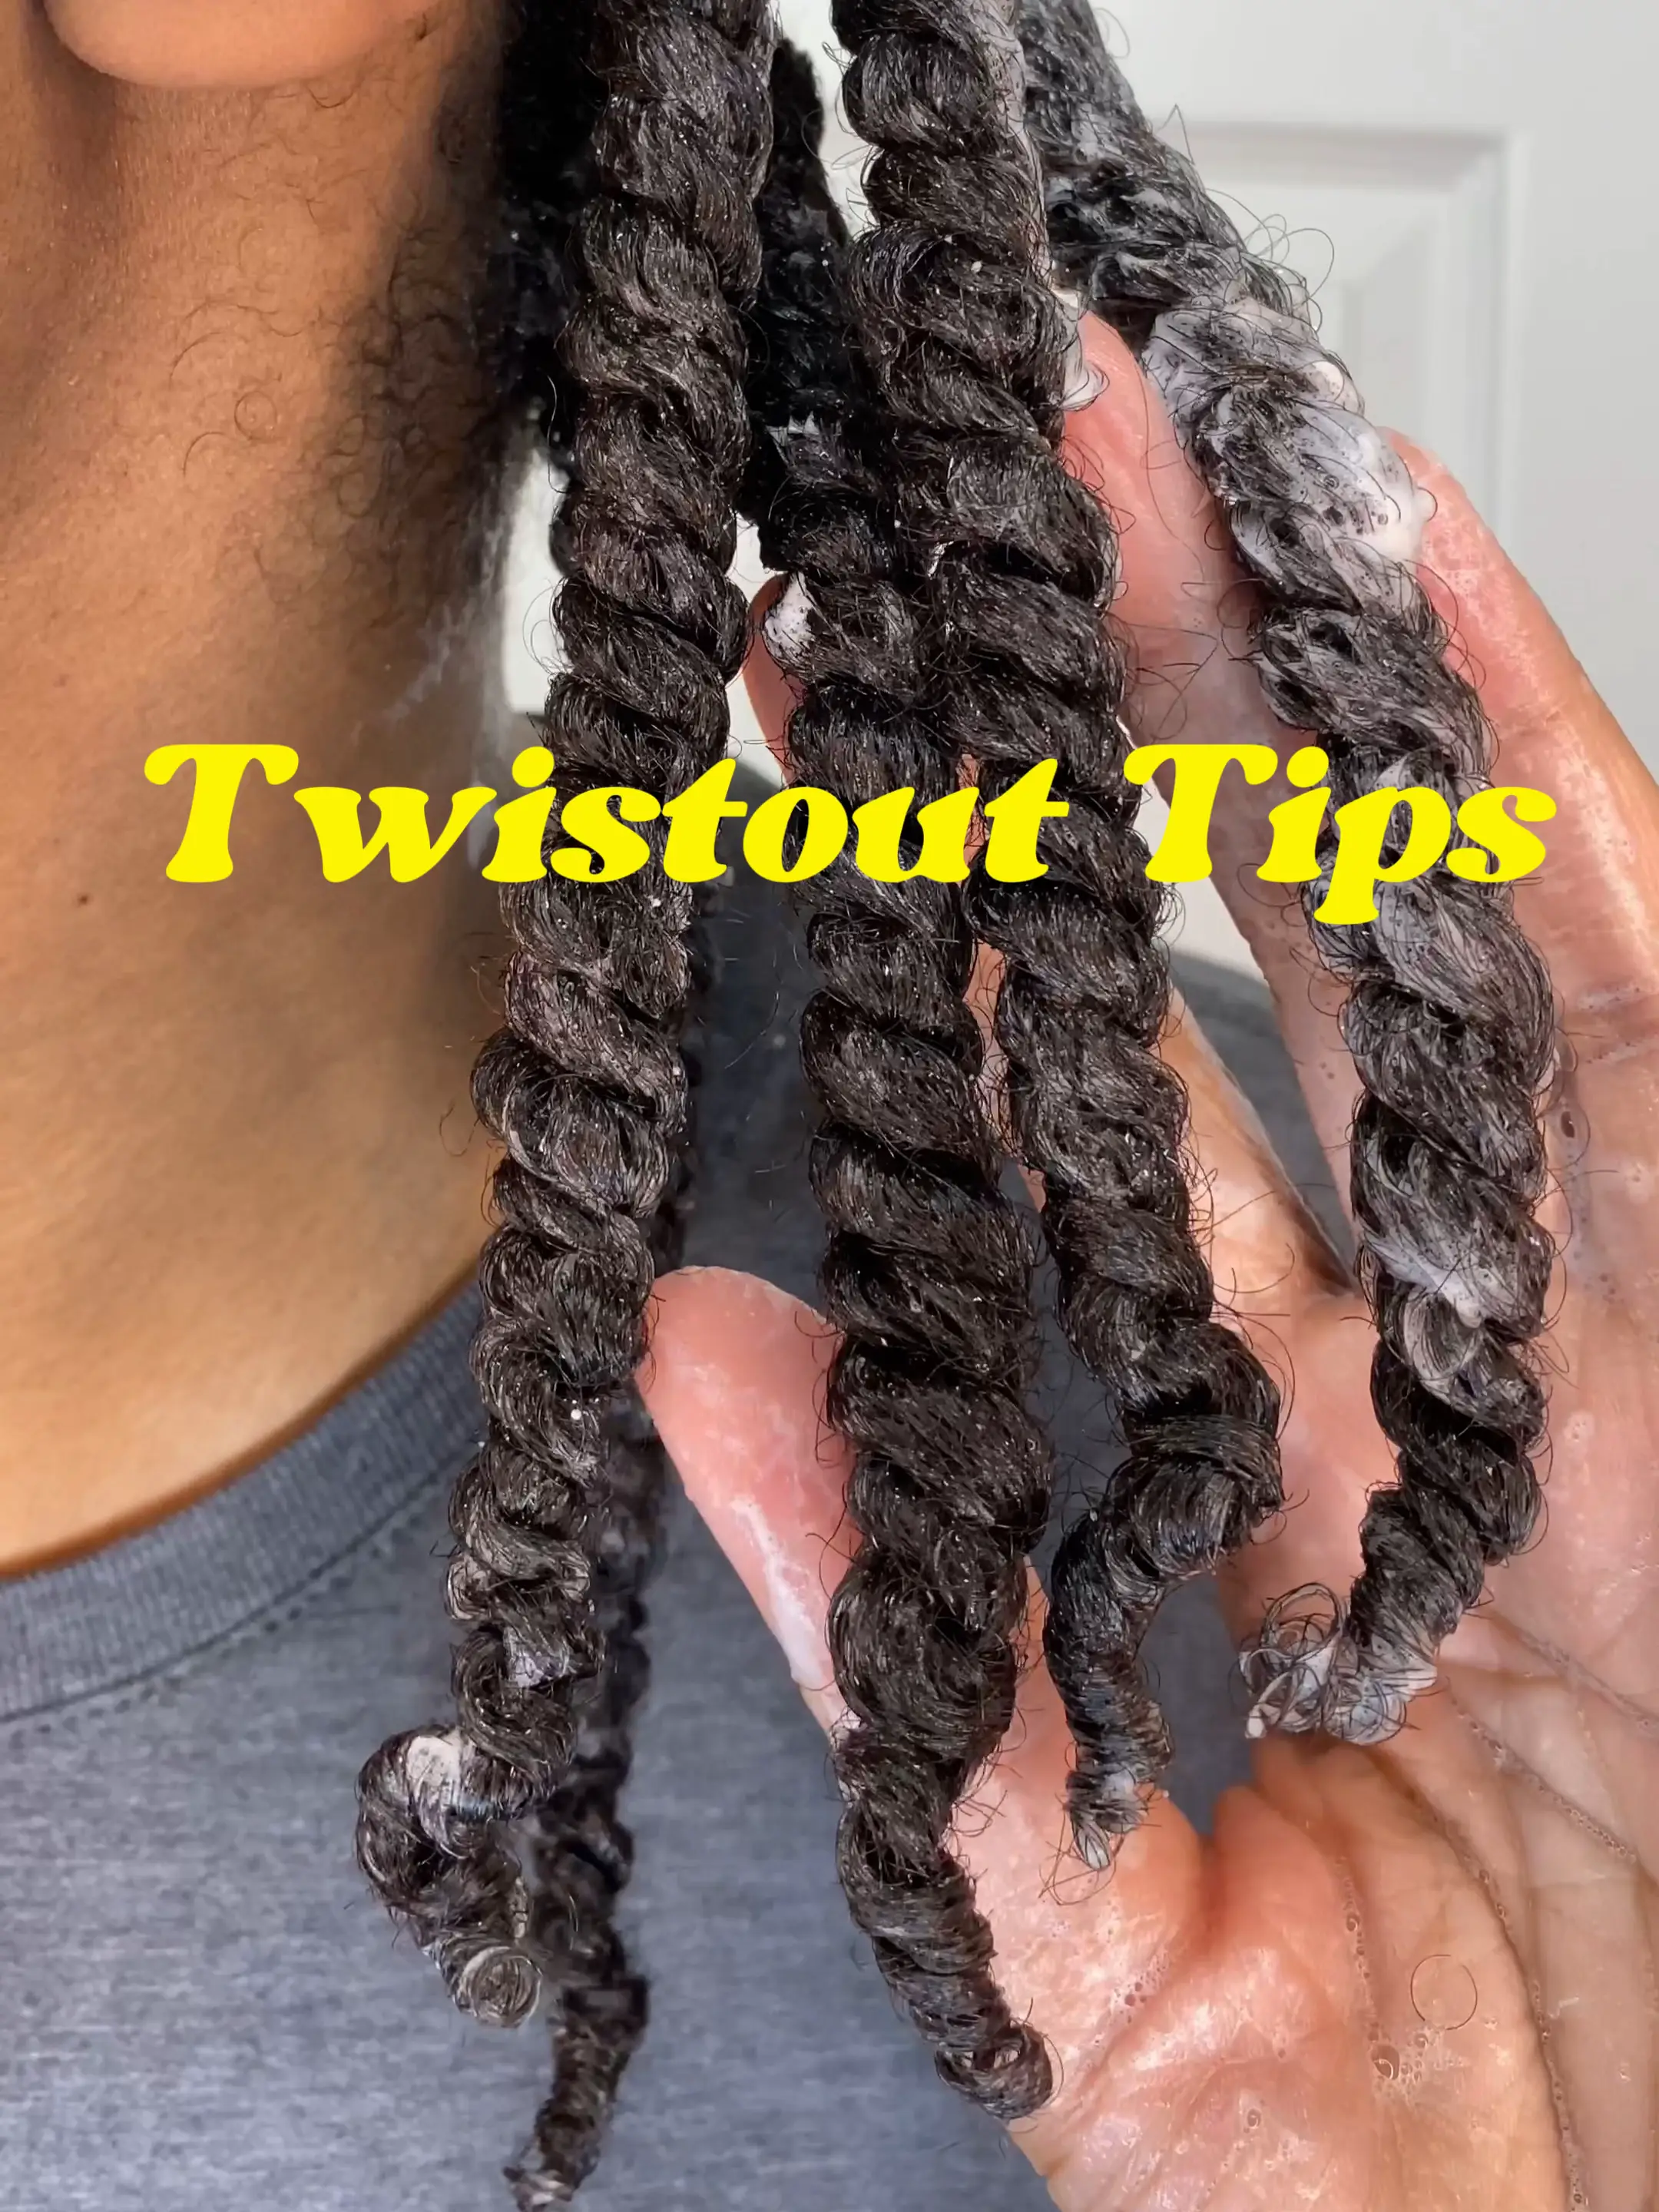 Mini twists give me so much life!!! If you are contemplating locs or just  want a style that's versatile but still natural, mini twists ar